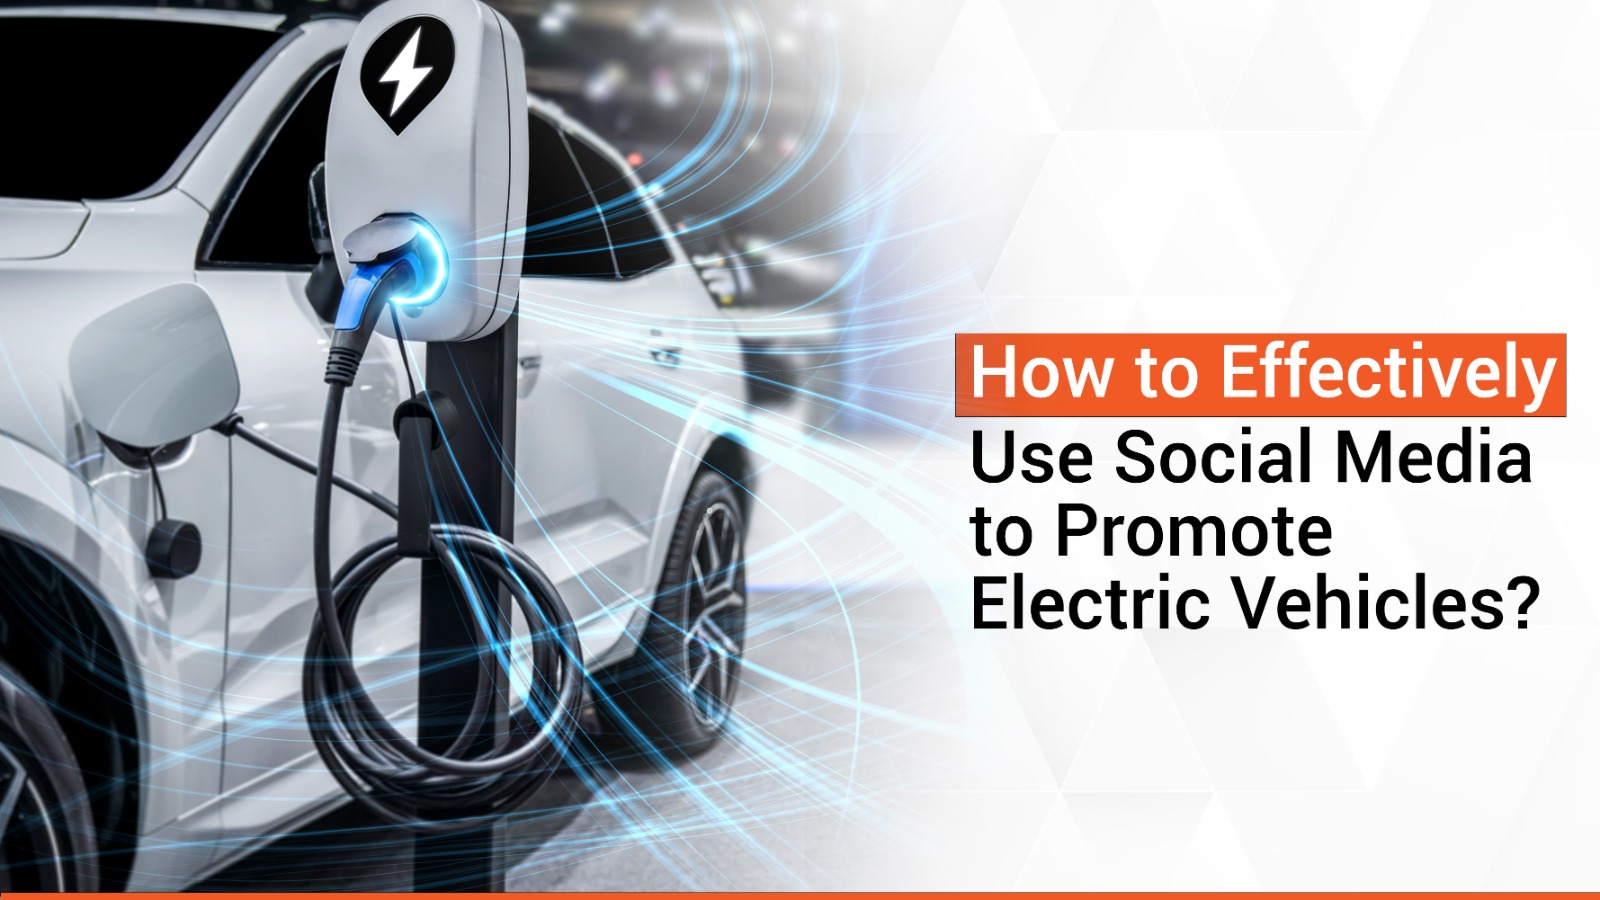 How to Effectively Use Social Media to Promote Electric Vehicles